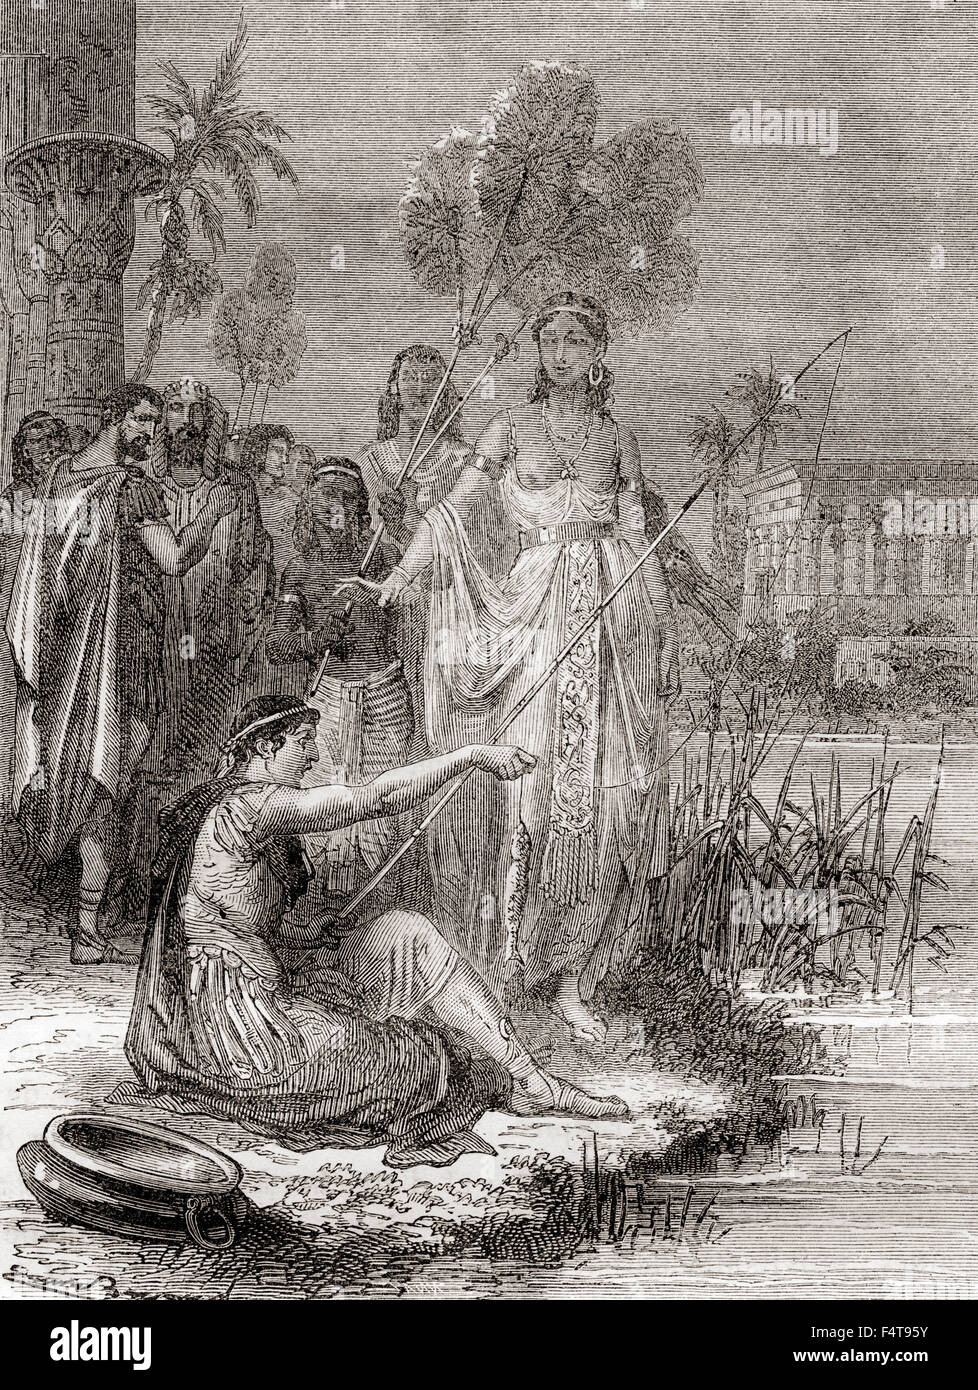 Illustration of the story told by Plutarch in his biography of Marc Antony about the fishing incident in which the Roman general's lover, Egyptian Queen Cleopatra, bested him. Stock Photo